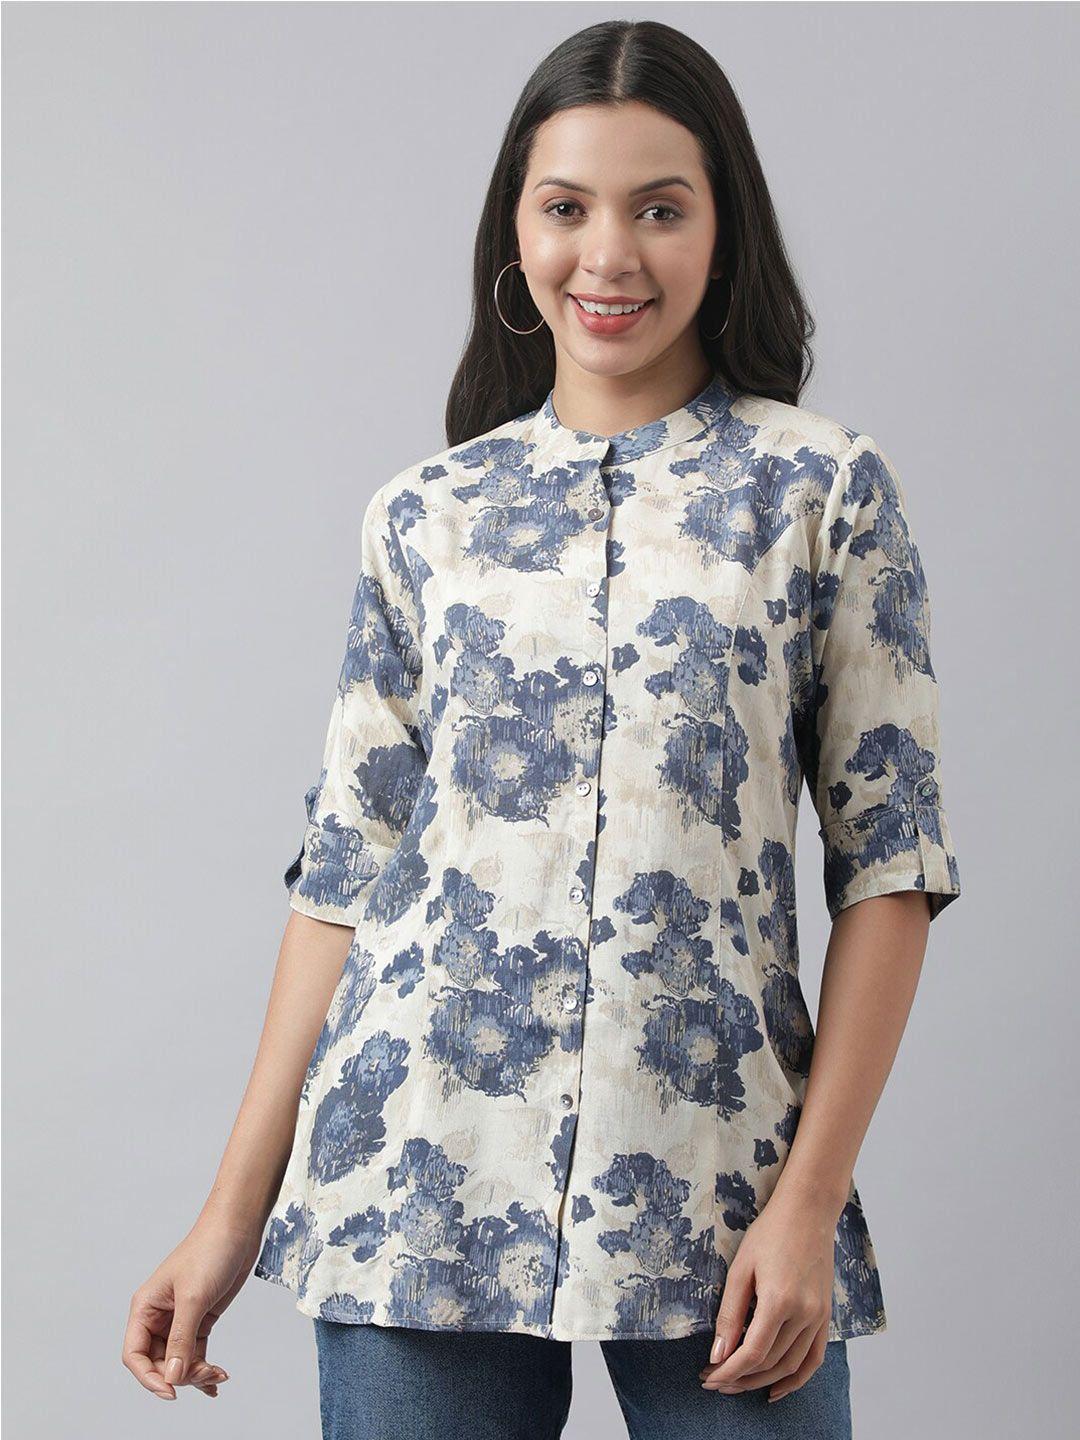 divena abstract printed mandarin collar roll-up sleeves a-line shirt style top